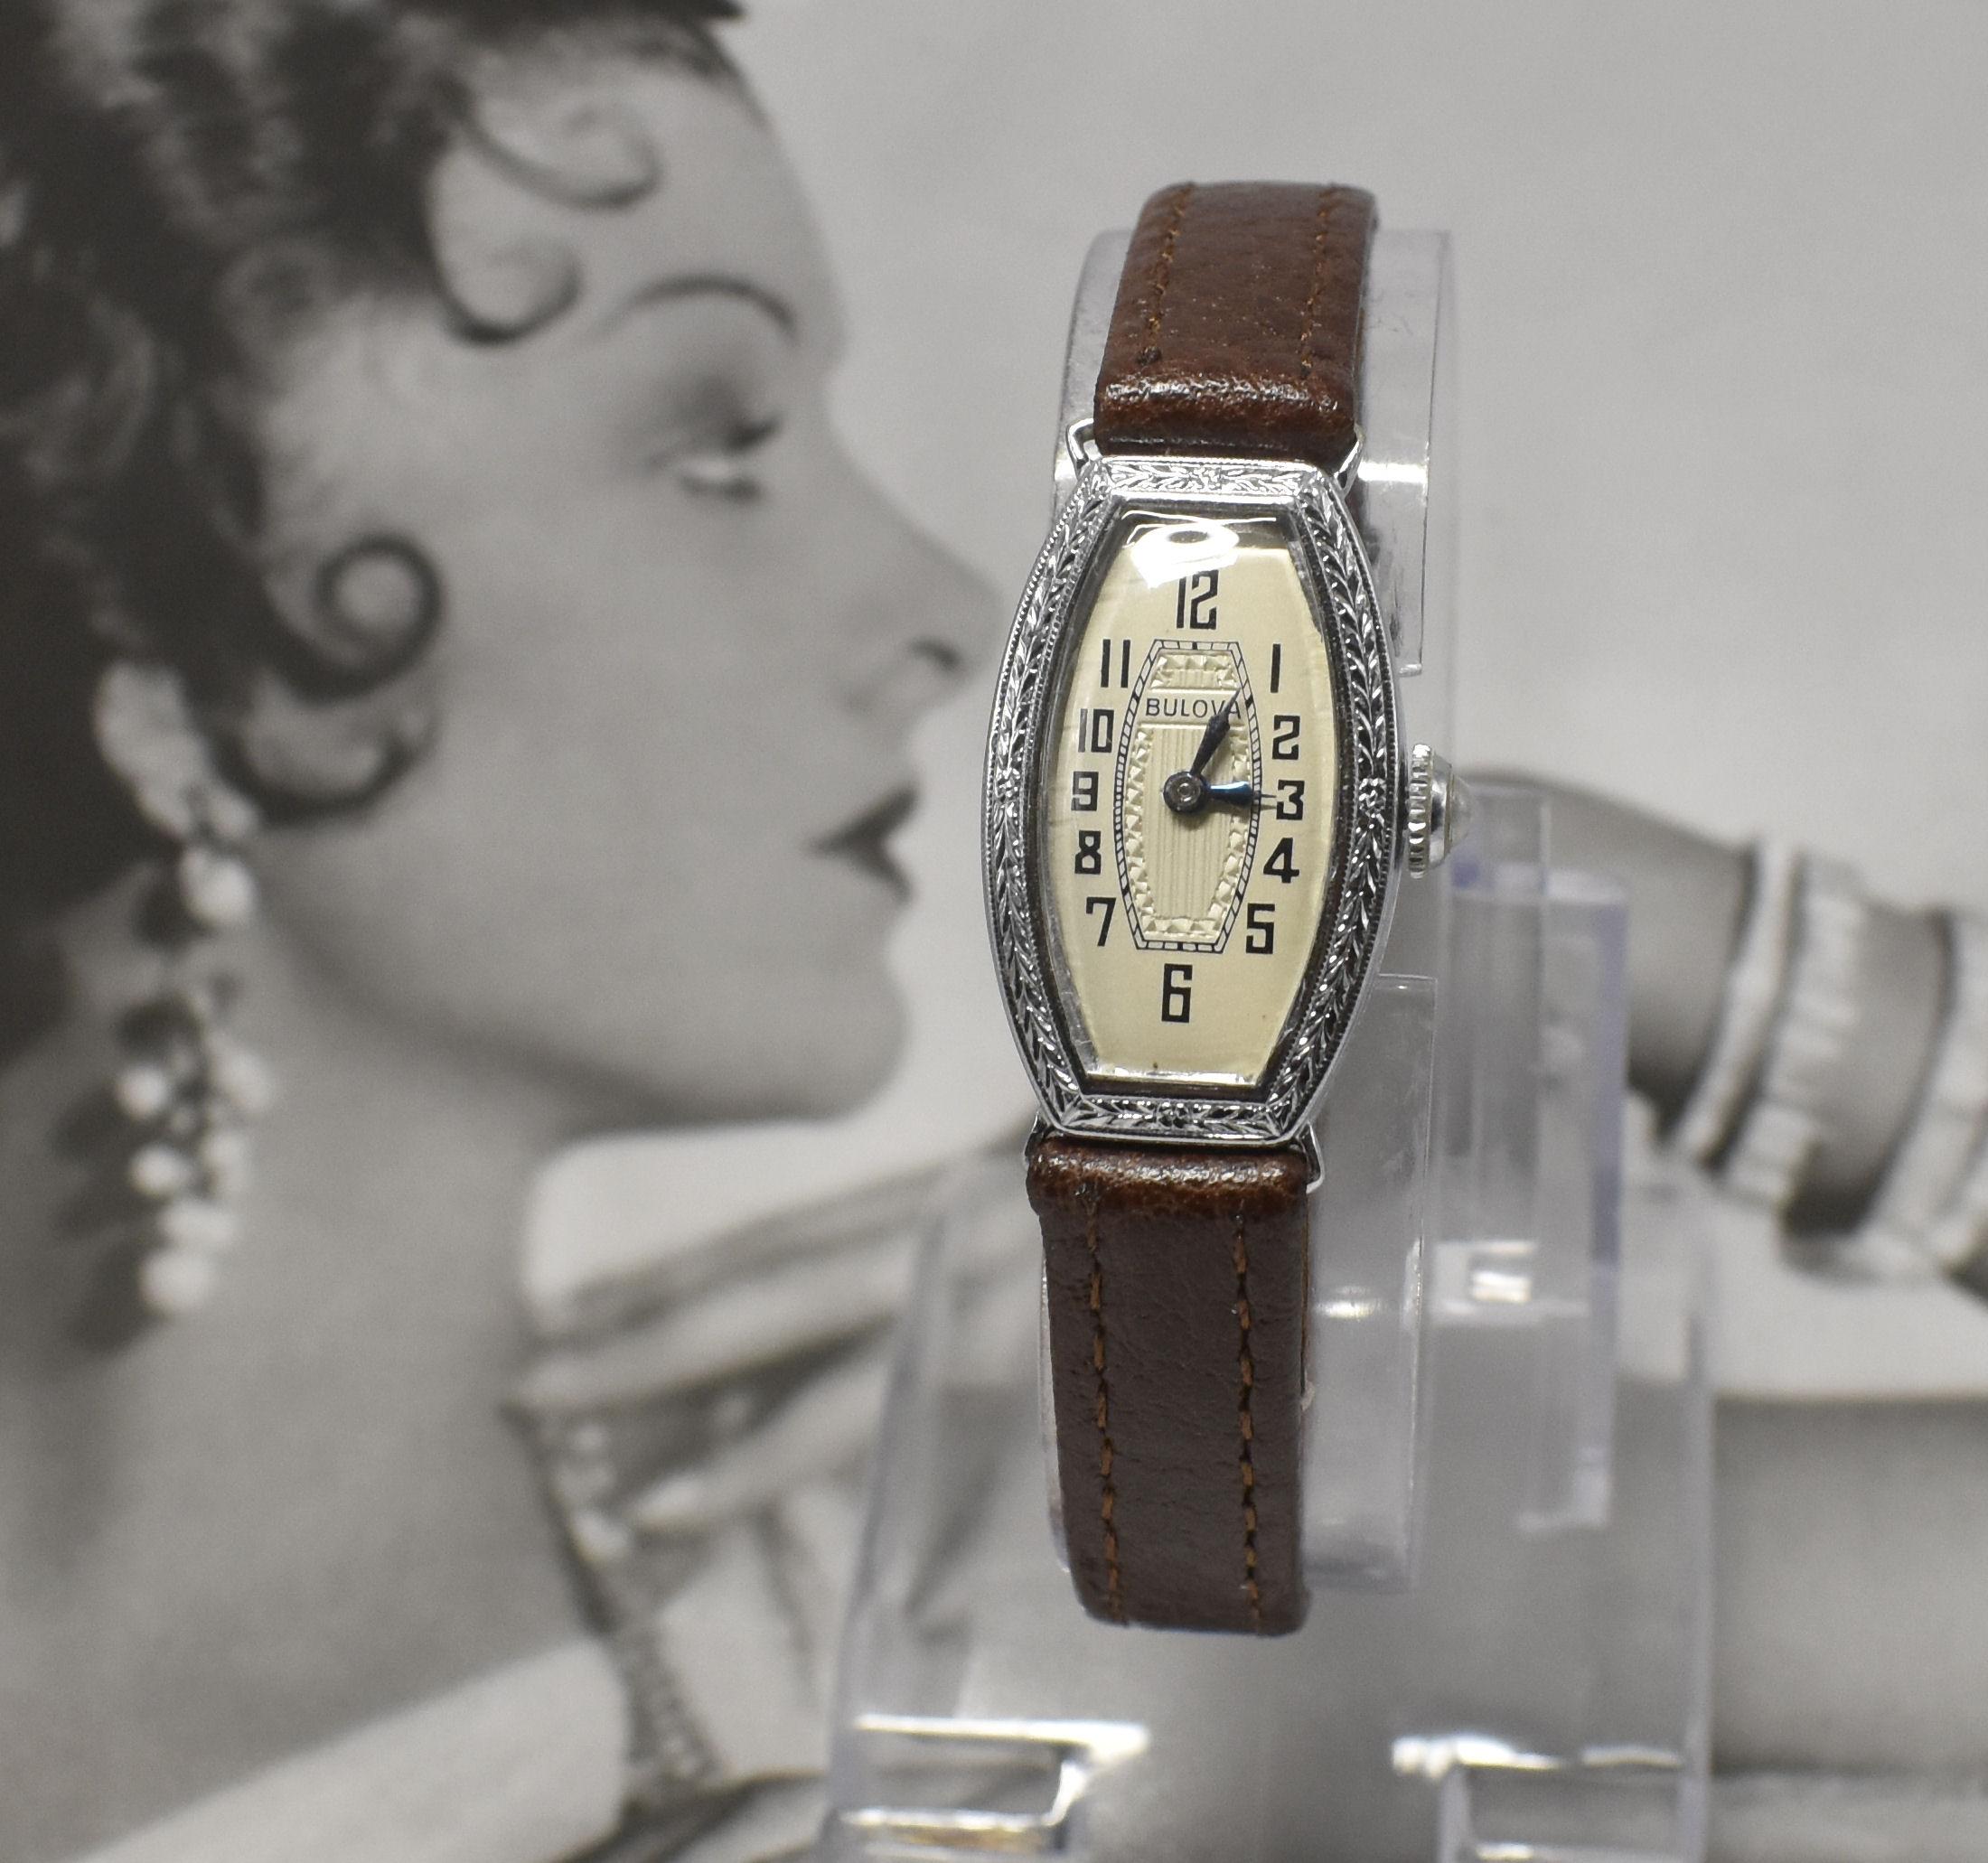 We are delighted to be able to offer you this wonderful ladies Art Deco watch made by the American watch company Bulova. This watch is one of the rare finds that is in almost faultless condition, in fact we can't find any faults to note at all. The